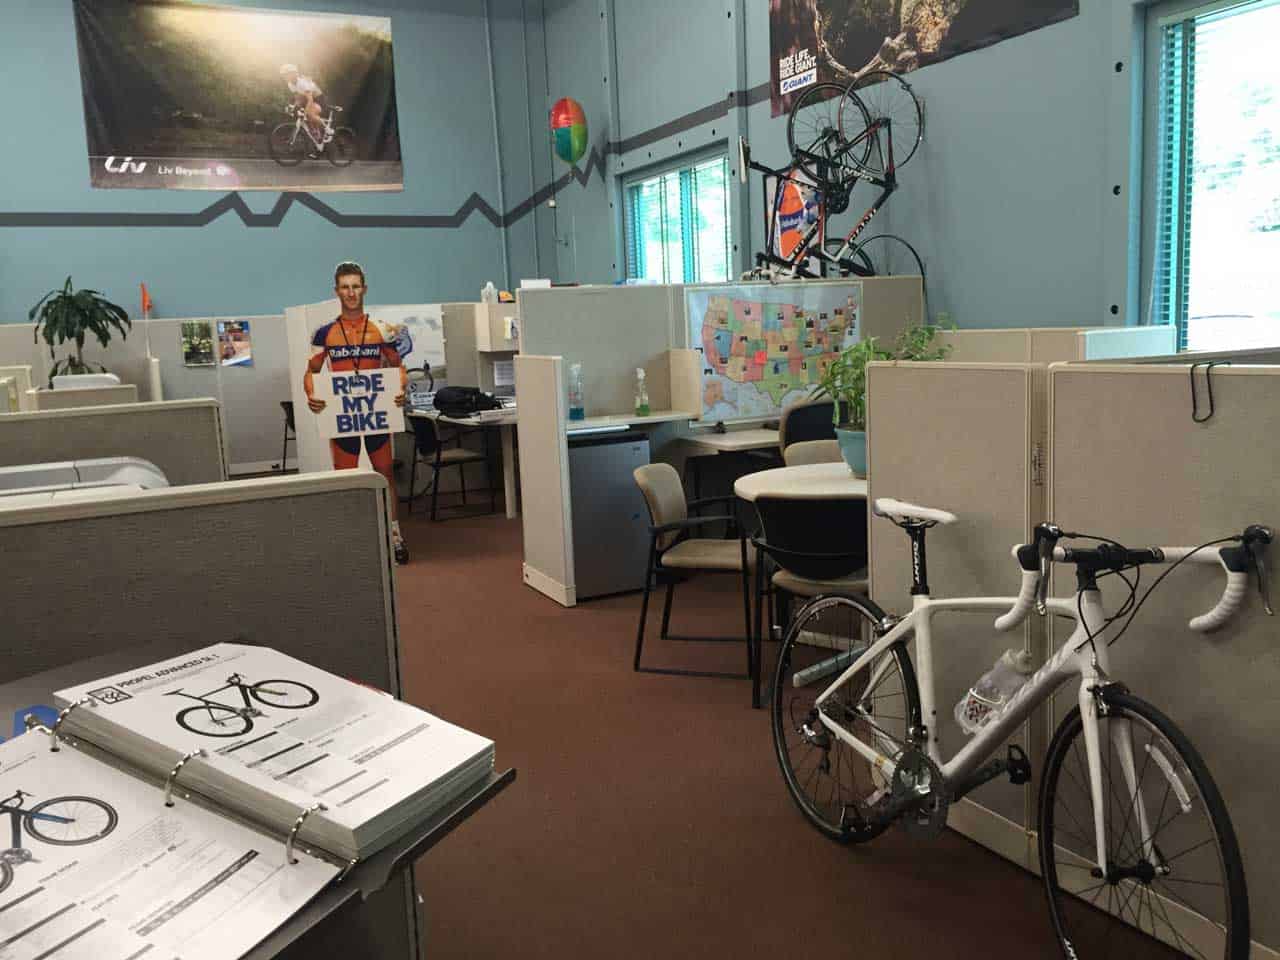 Bikes in Authentic Corporate Office and Cycling Photos on the Walls